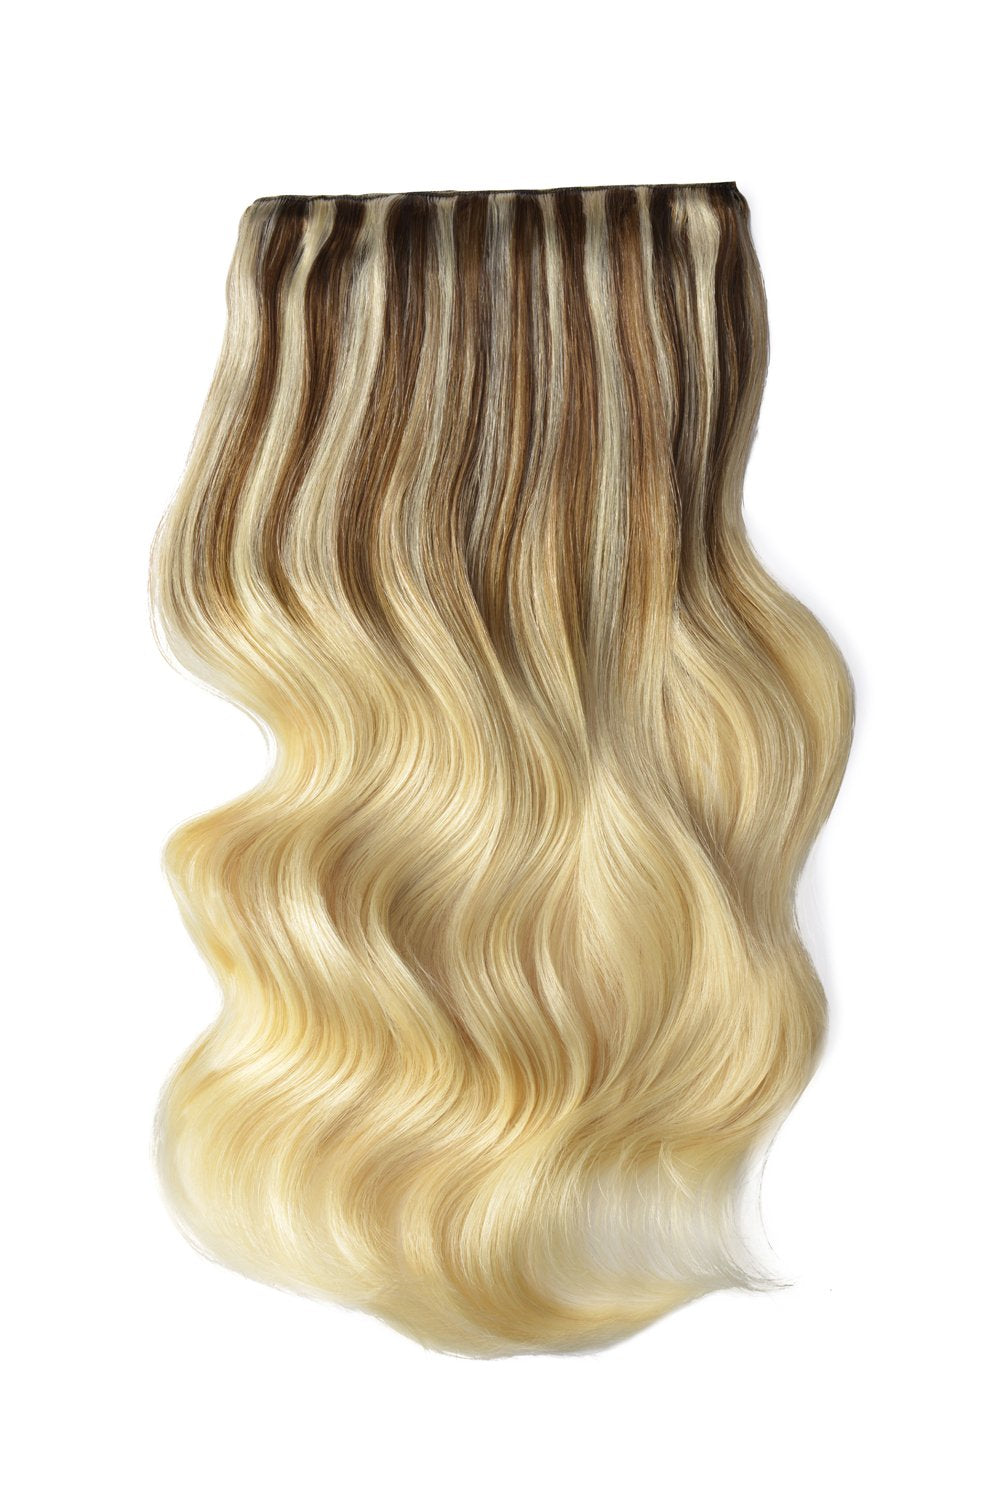 Hair extensions clip in balayage Shade TP6/613